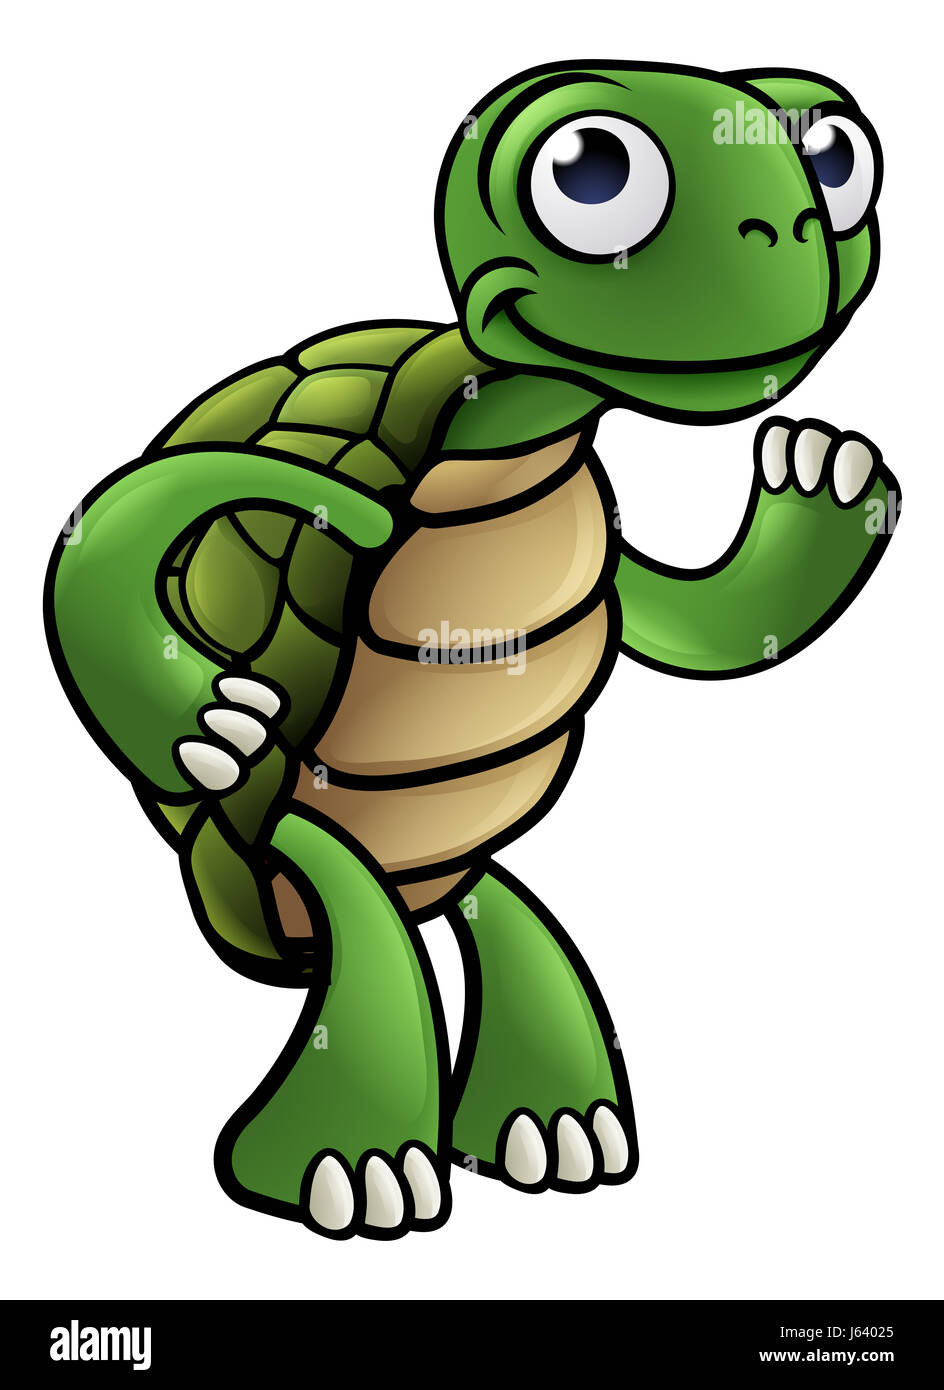 A tortoise cartoon character smiling and waving Stock Photo